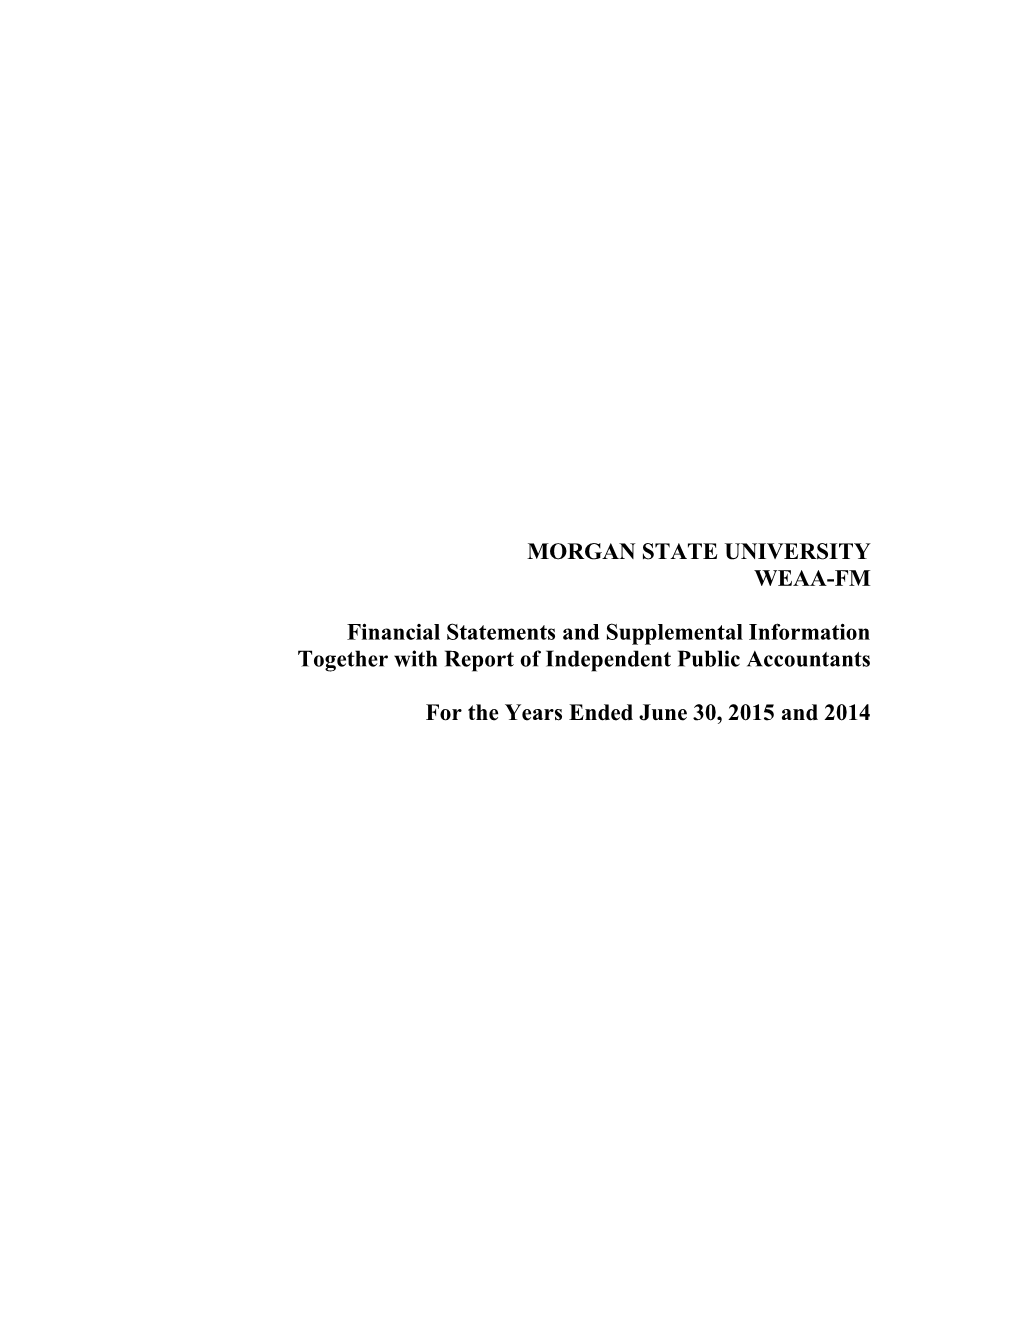 MORGAN STATE UNIVERSITY WEAA-FM Financial Statements and Supplemental Information Together with Report of Independent Public